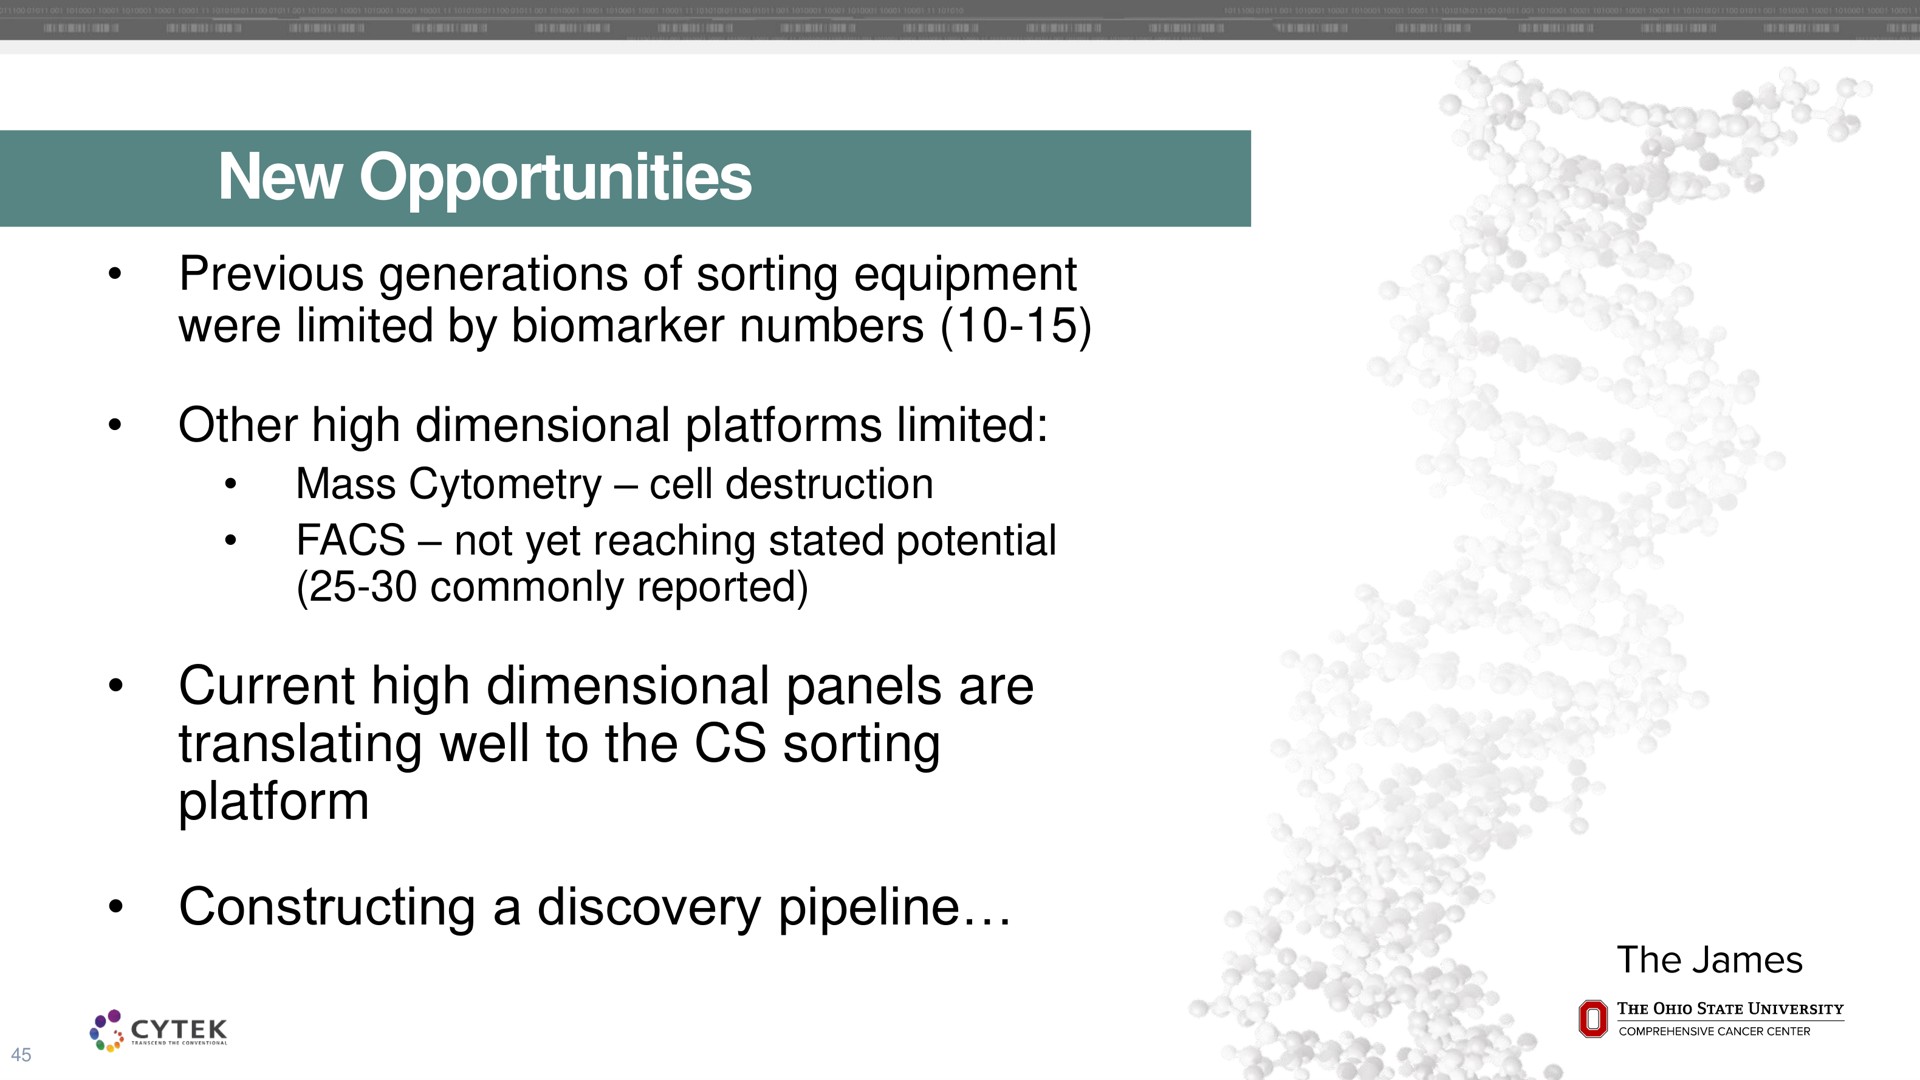 new opportunities current high dimensional panels are translating well to the sorting platform constructing a discovery pipeline previous generations of equipment were limited by numbers other platforms limited | Cytek